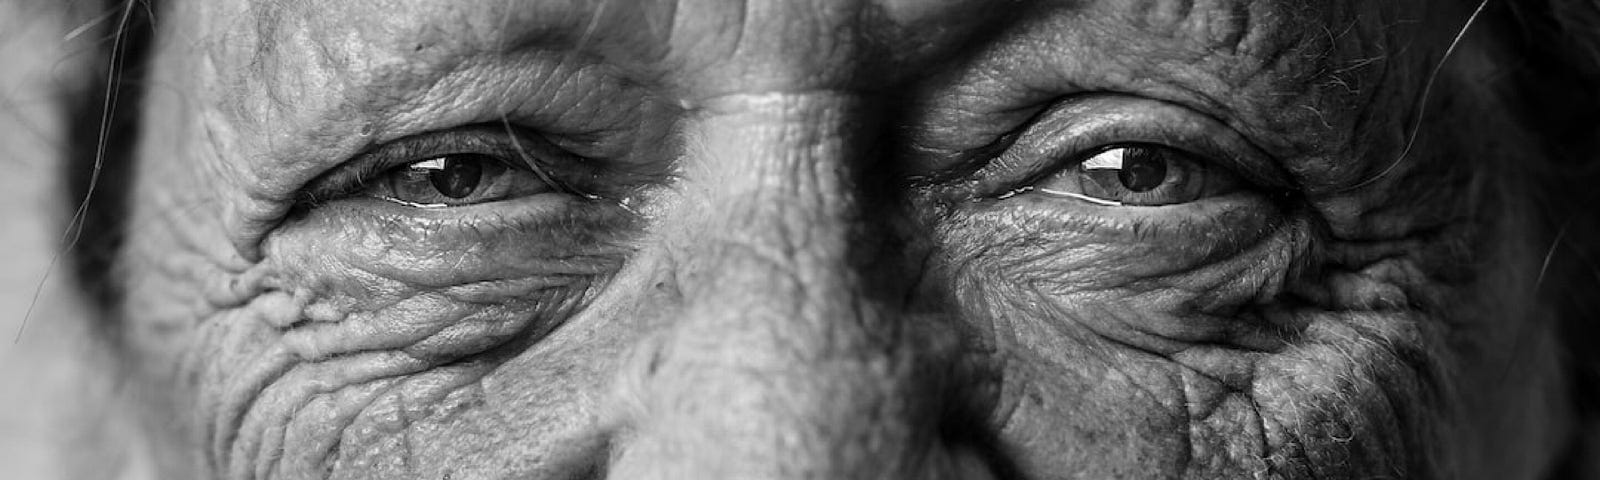 A black and white photo of an elderly woman with a very lined and wrinkled face smiles sweetly into the camera.